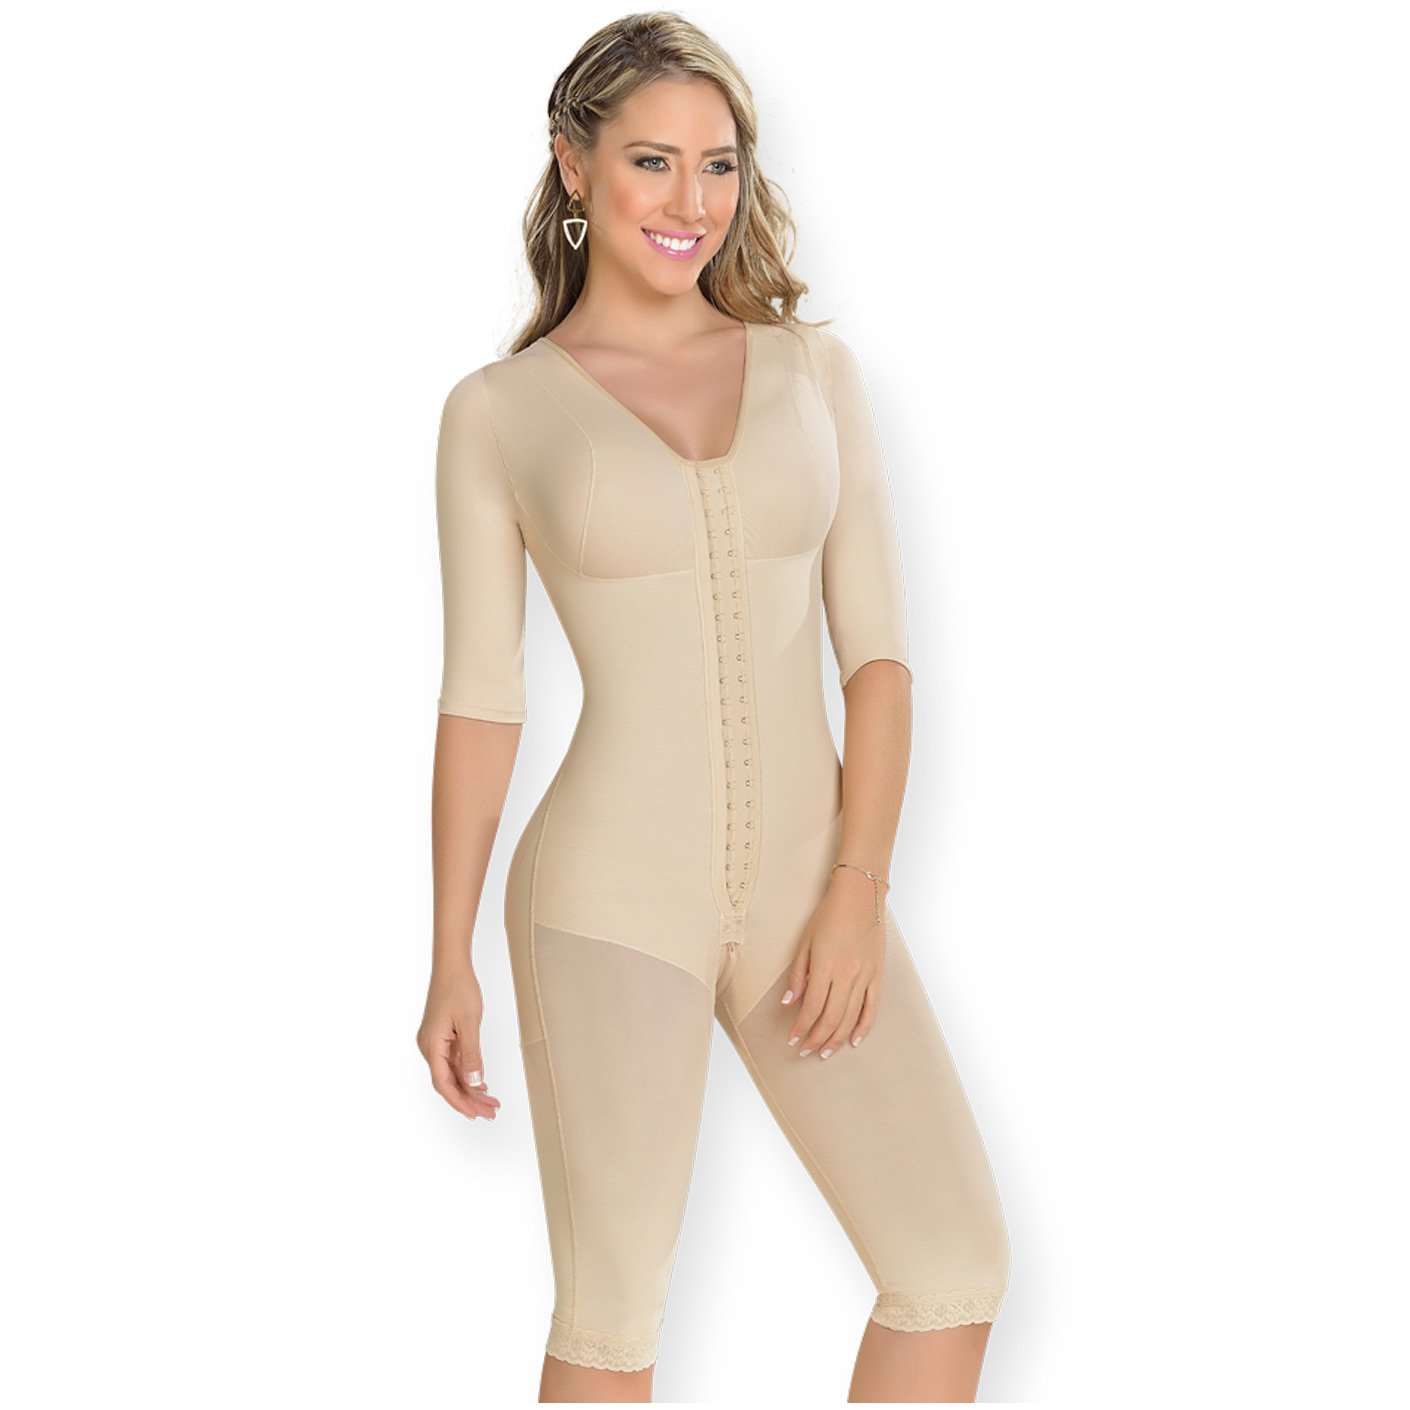 Full Body With Bra And Sleeves Shapewear